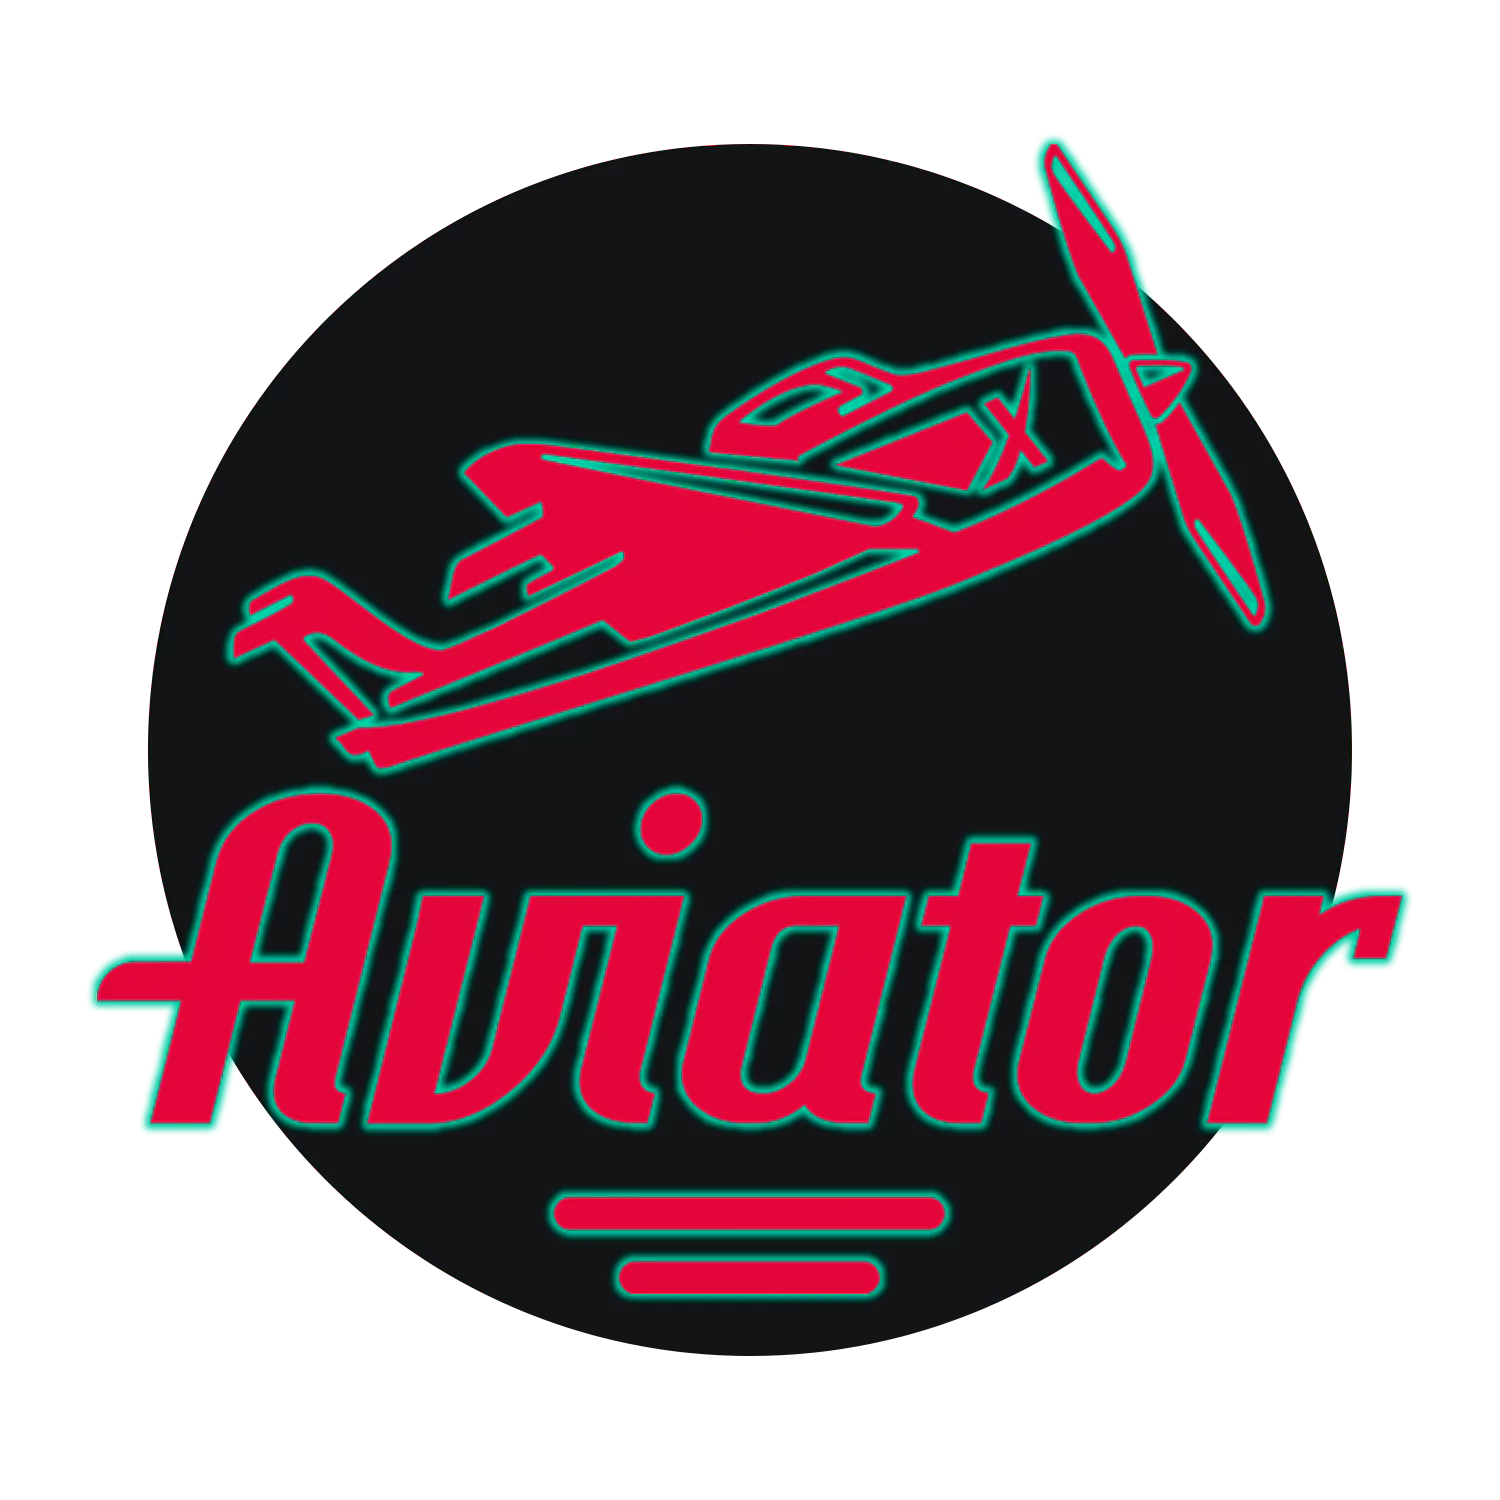 From this article, you learn how to play the Aviator at the Pin-Up site.